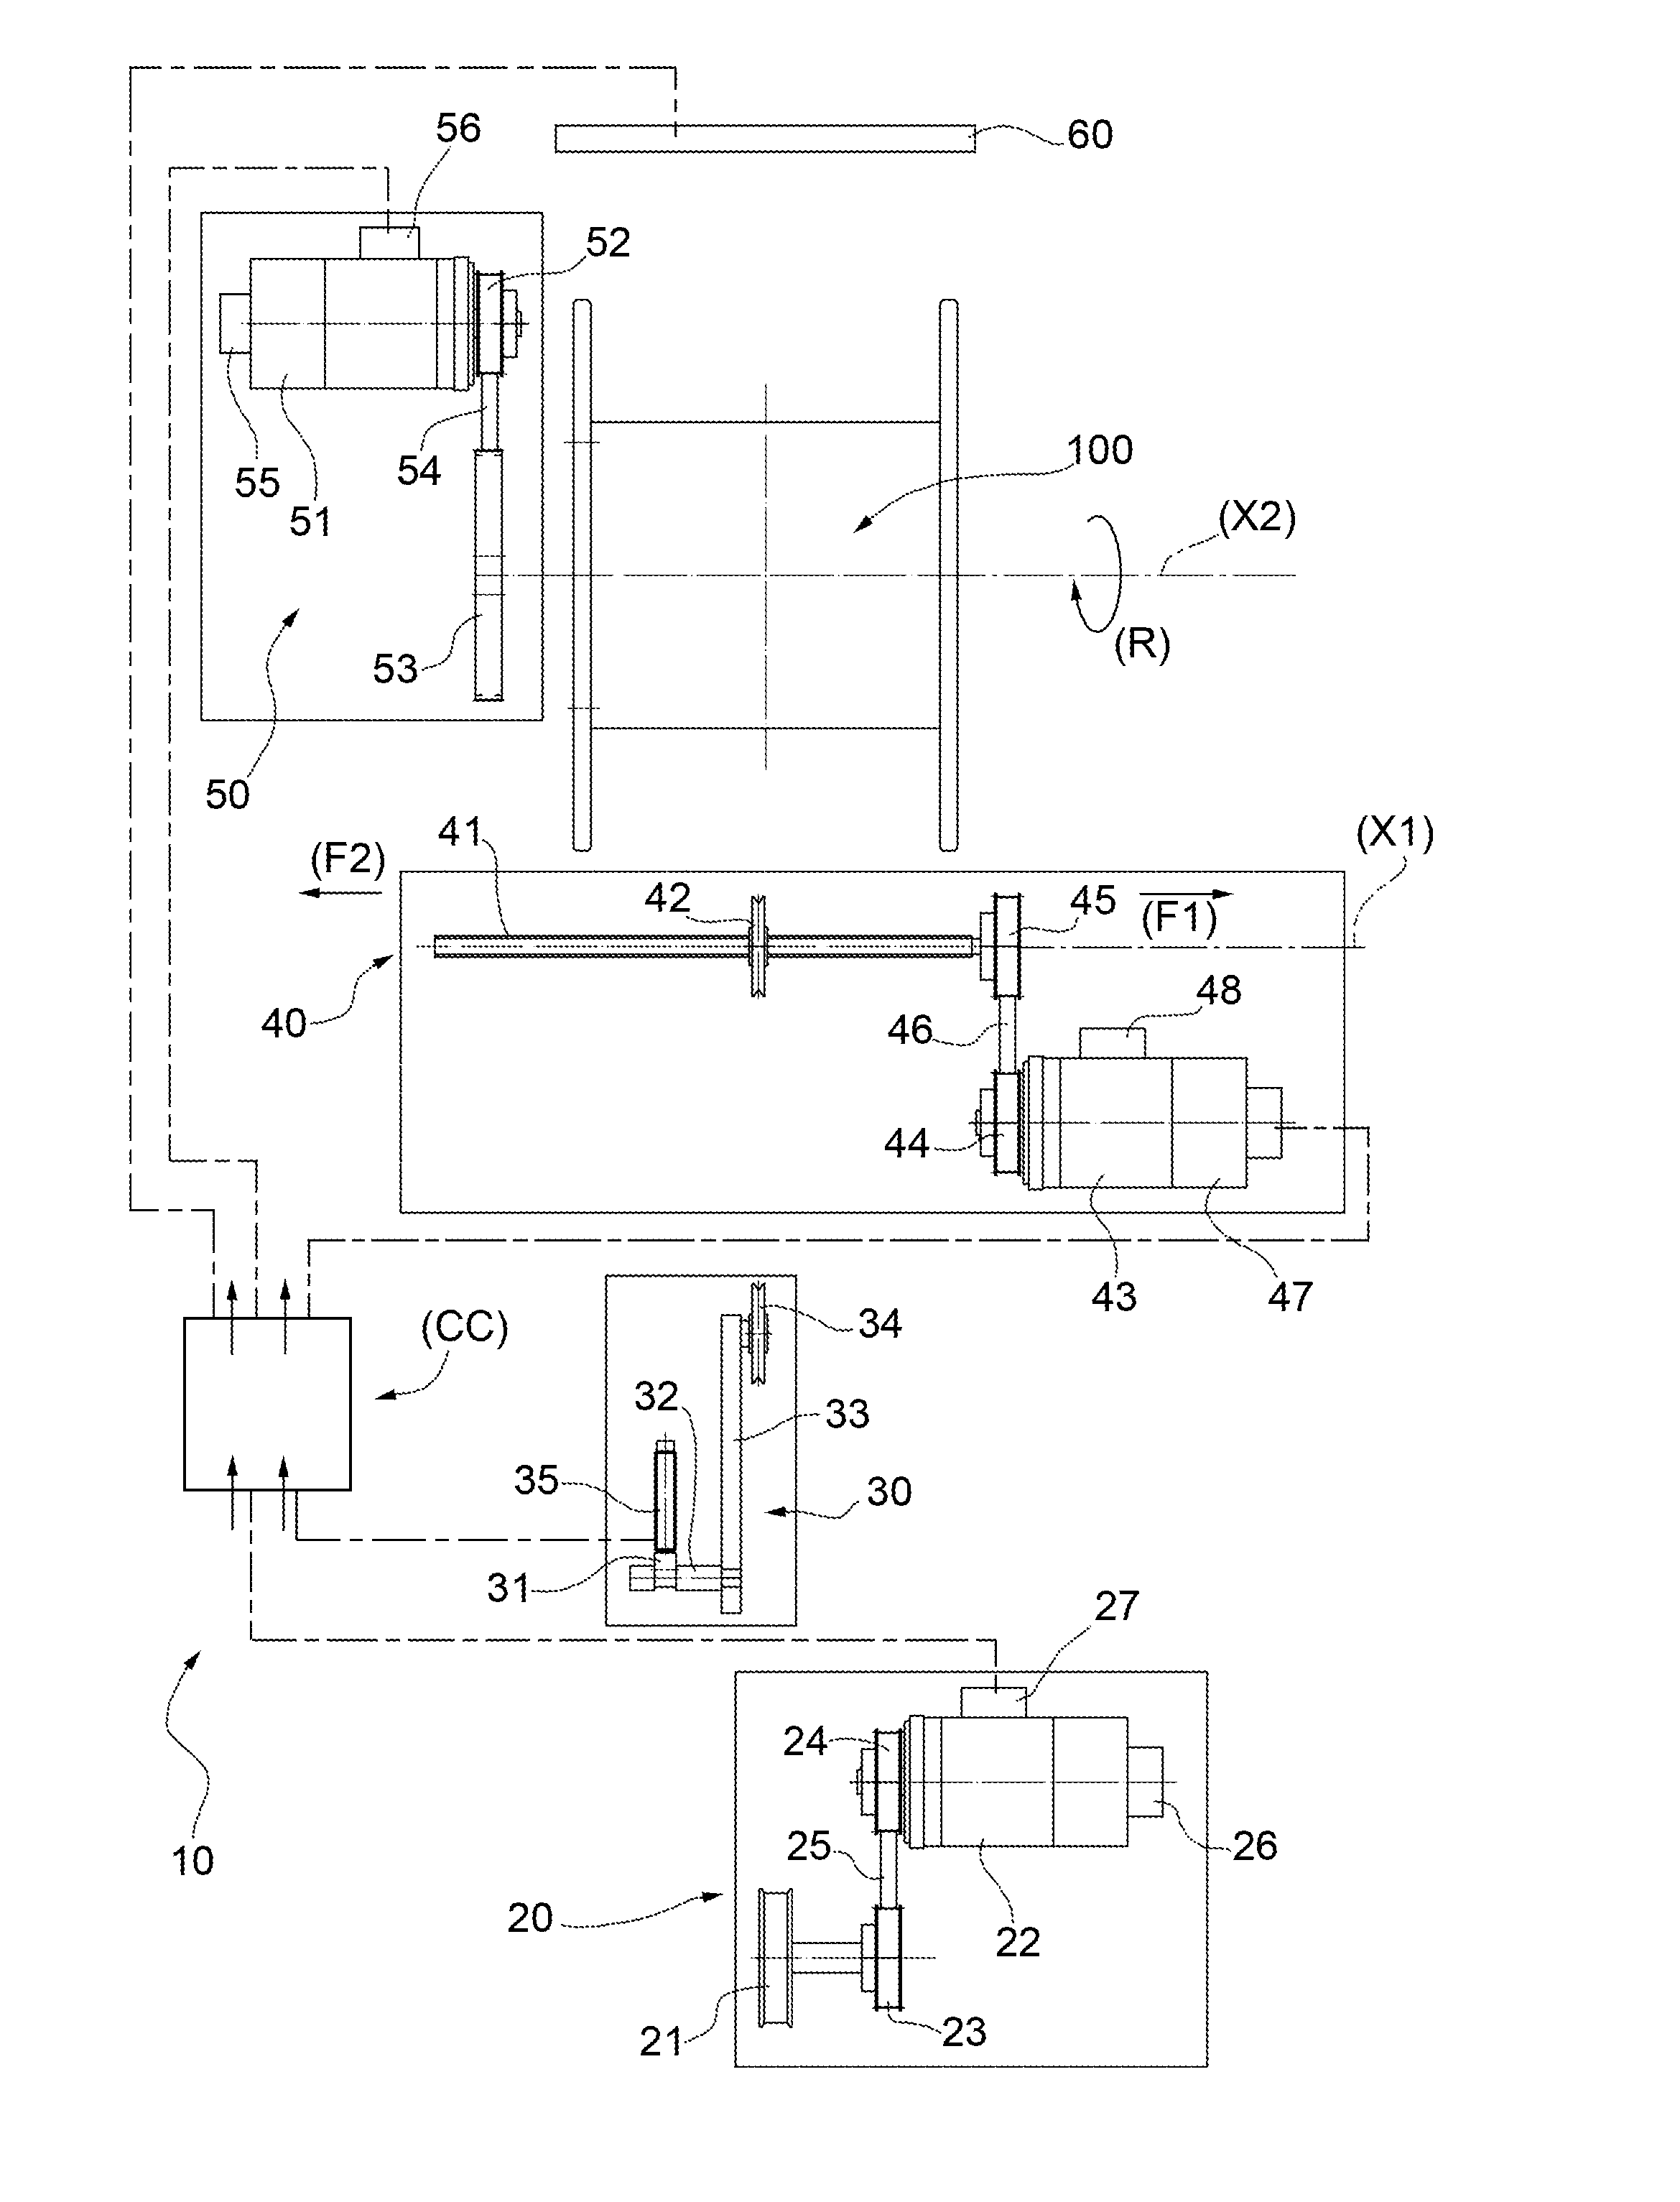 Method for implementing a correct winding of a wire on a spool